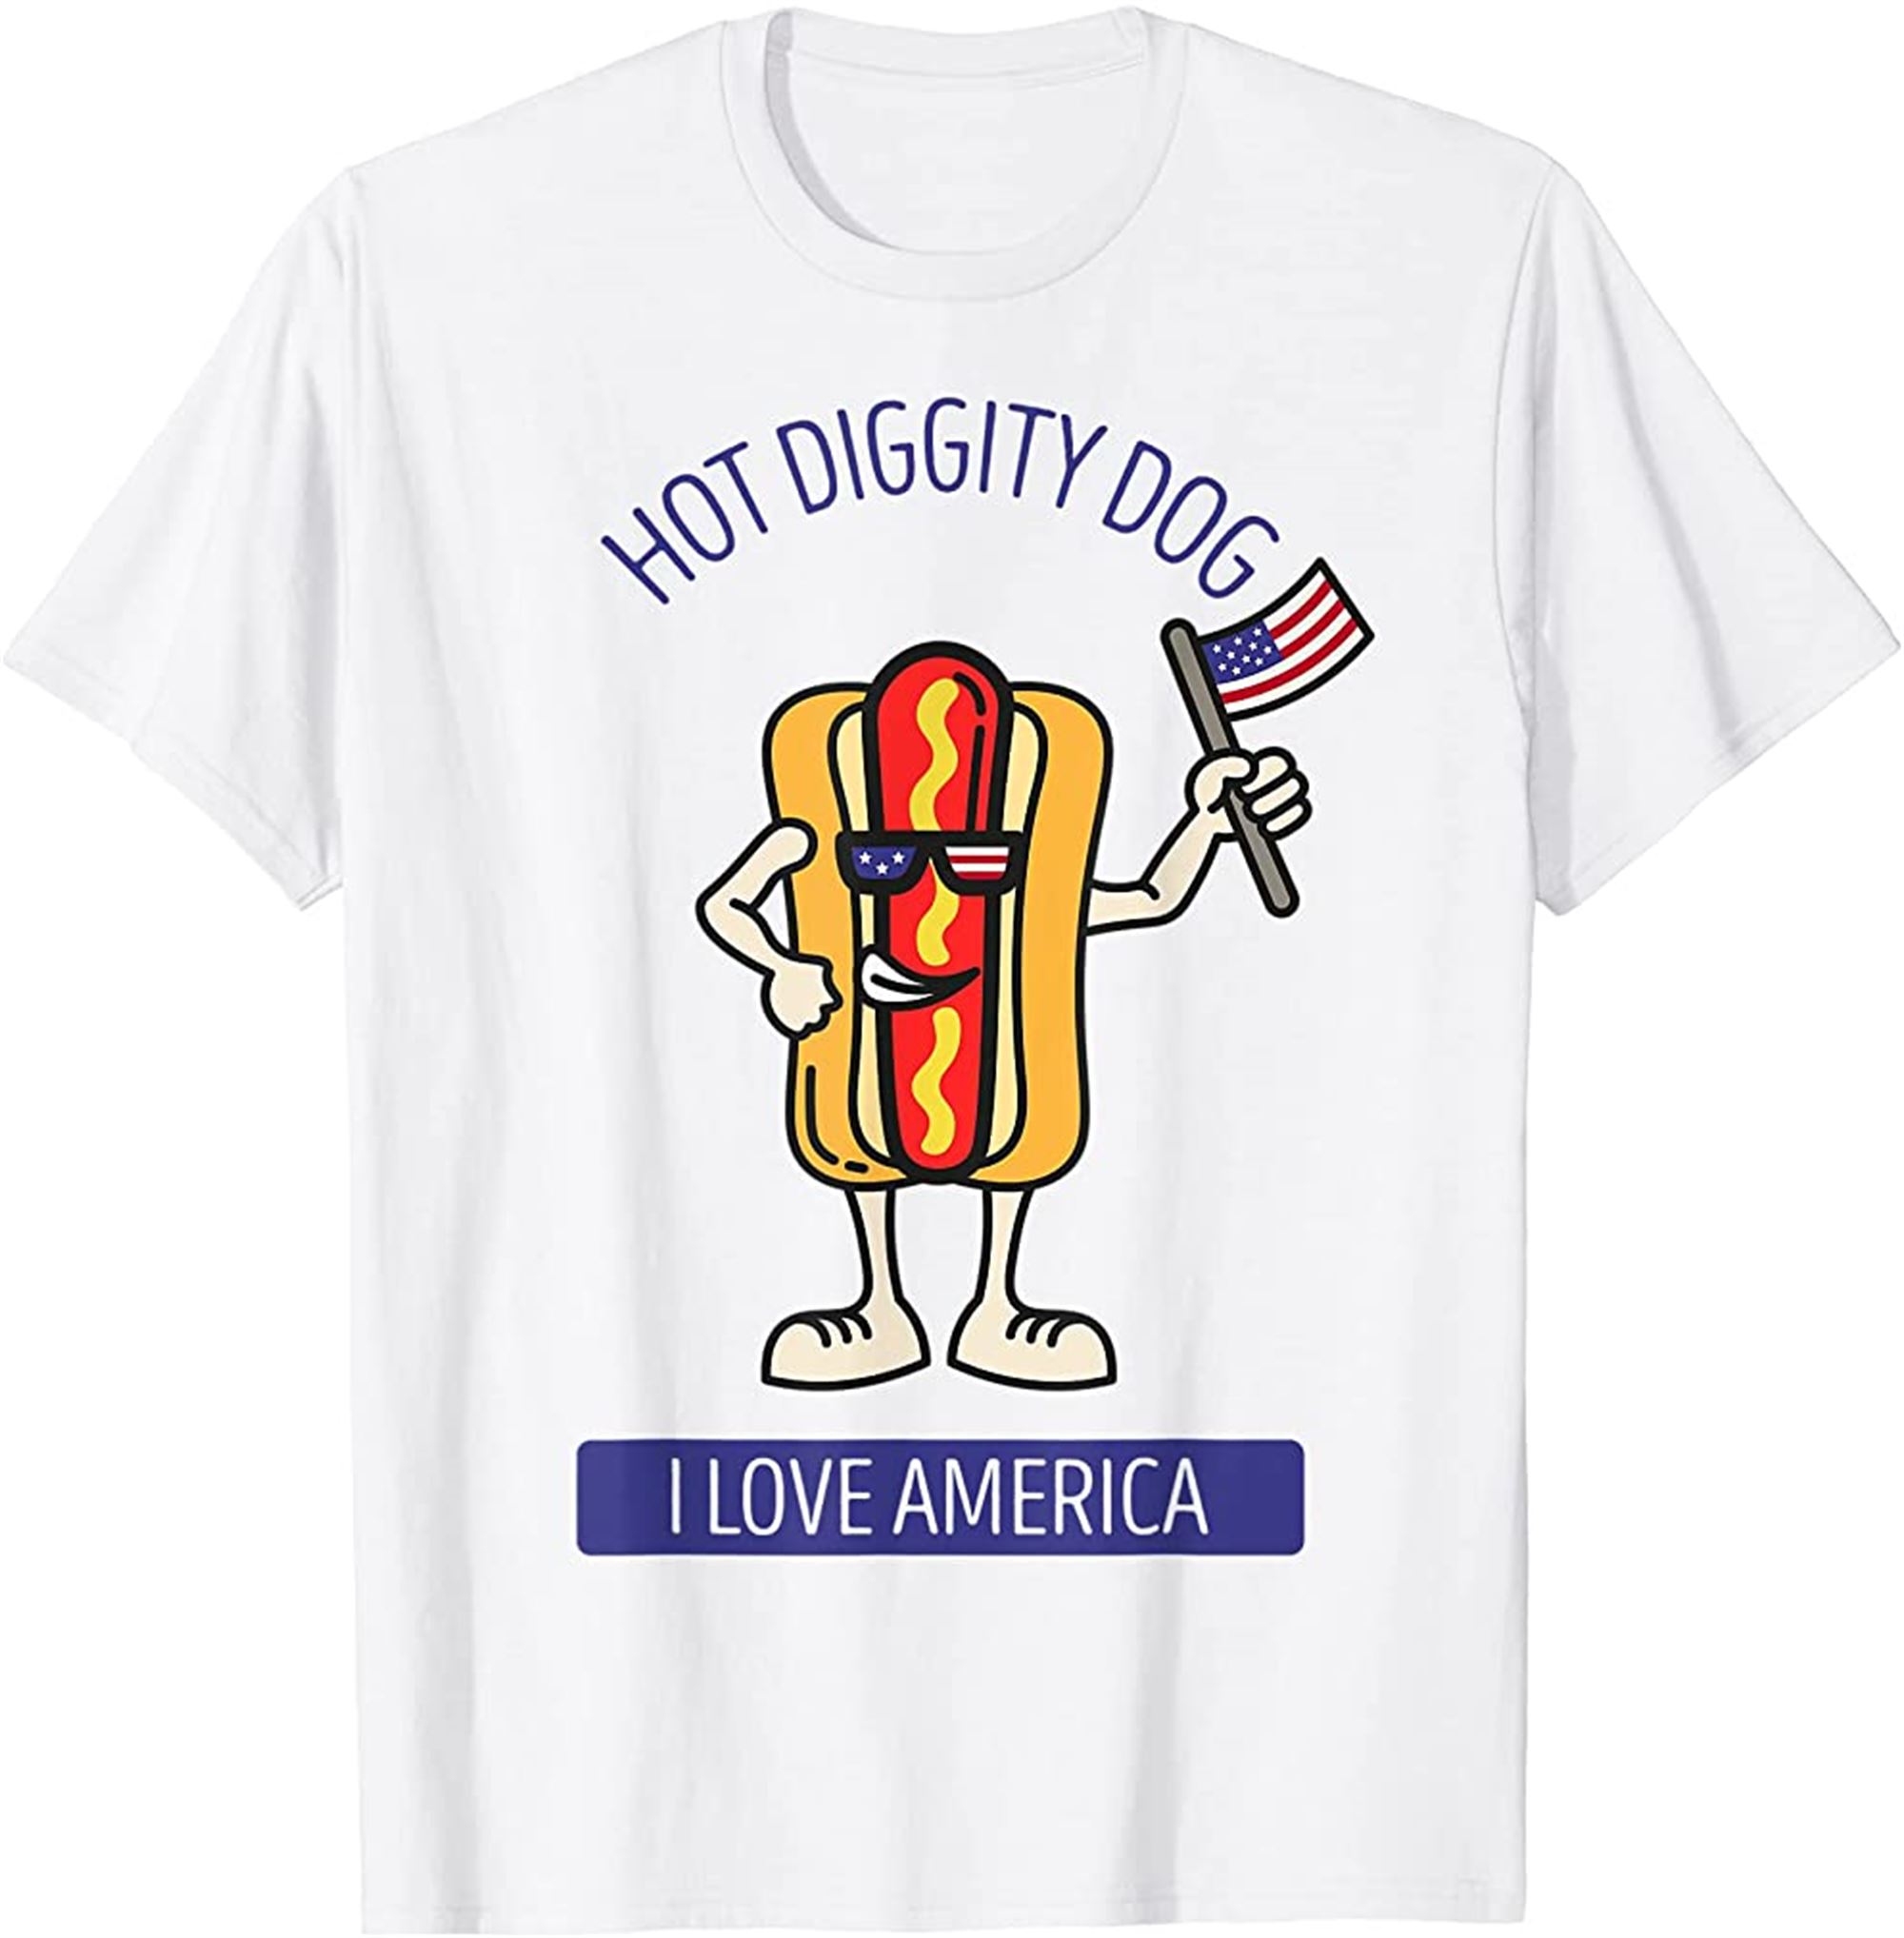 Hot Diggity Dog July 4th Patriotic Bbq Picnic Usa Funny T-shirt Plus Size Up To 5xl